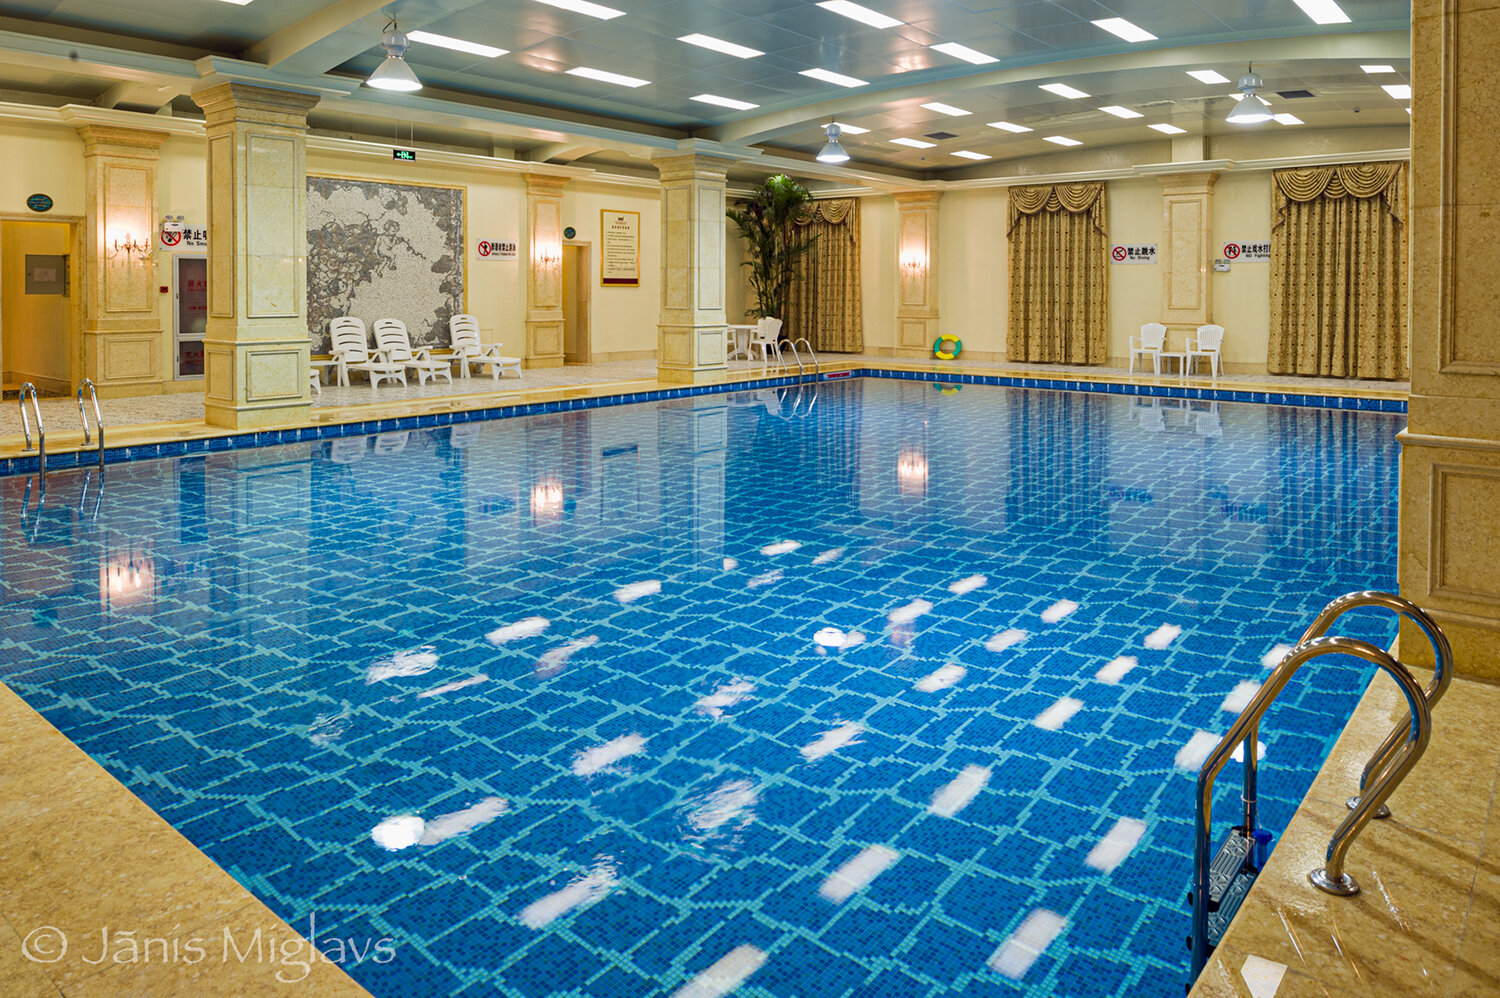 Doesn't every winery have an Olympic-size swimming pool like Changyu AFIP?